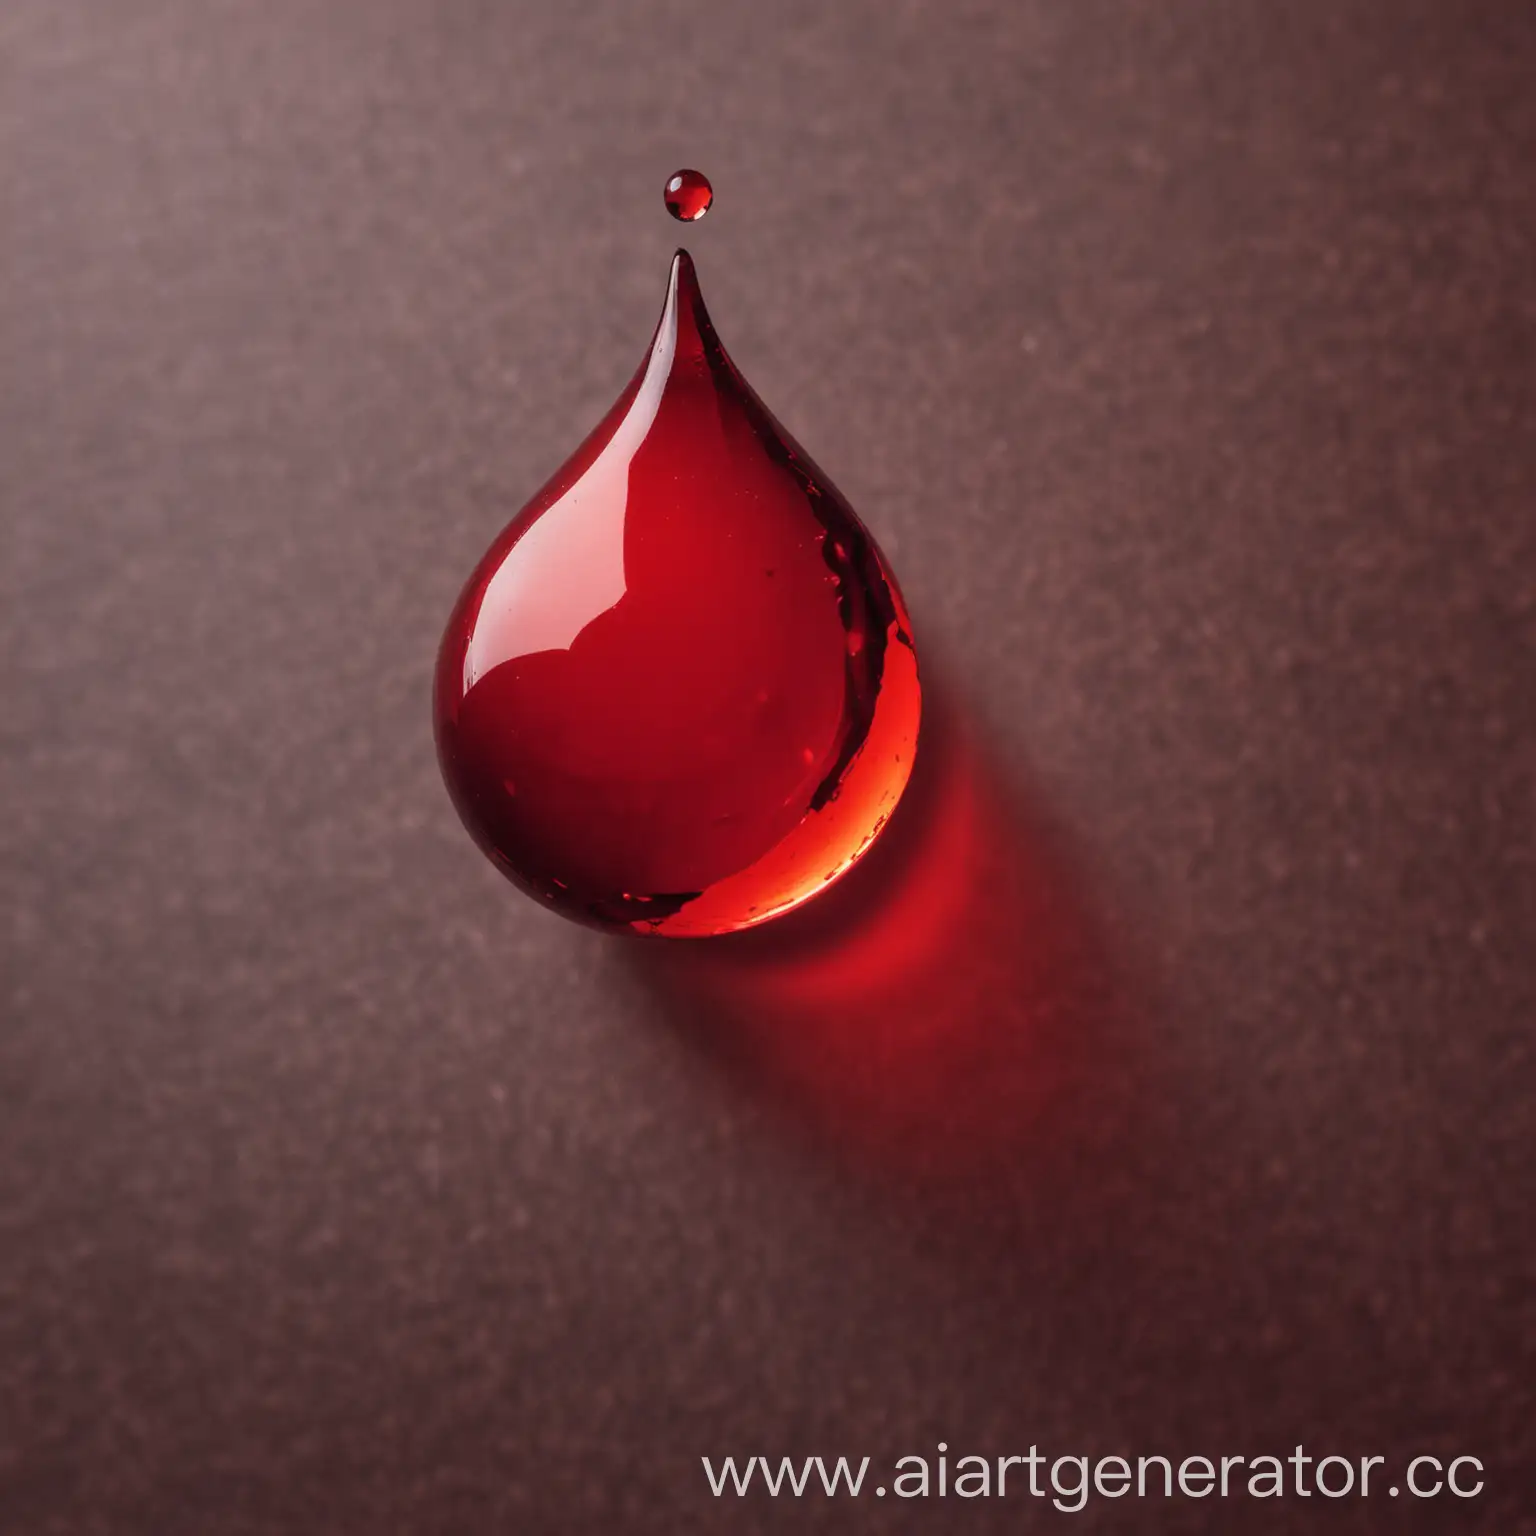 Vibrant-Red-Drop-Shape-on-Reflective-Surface